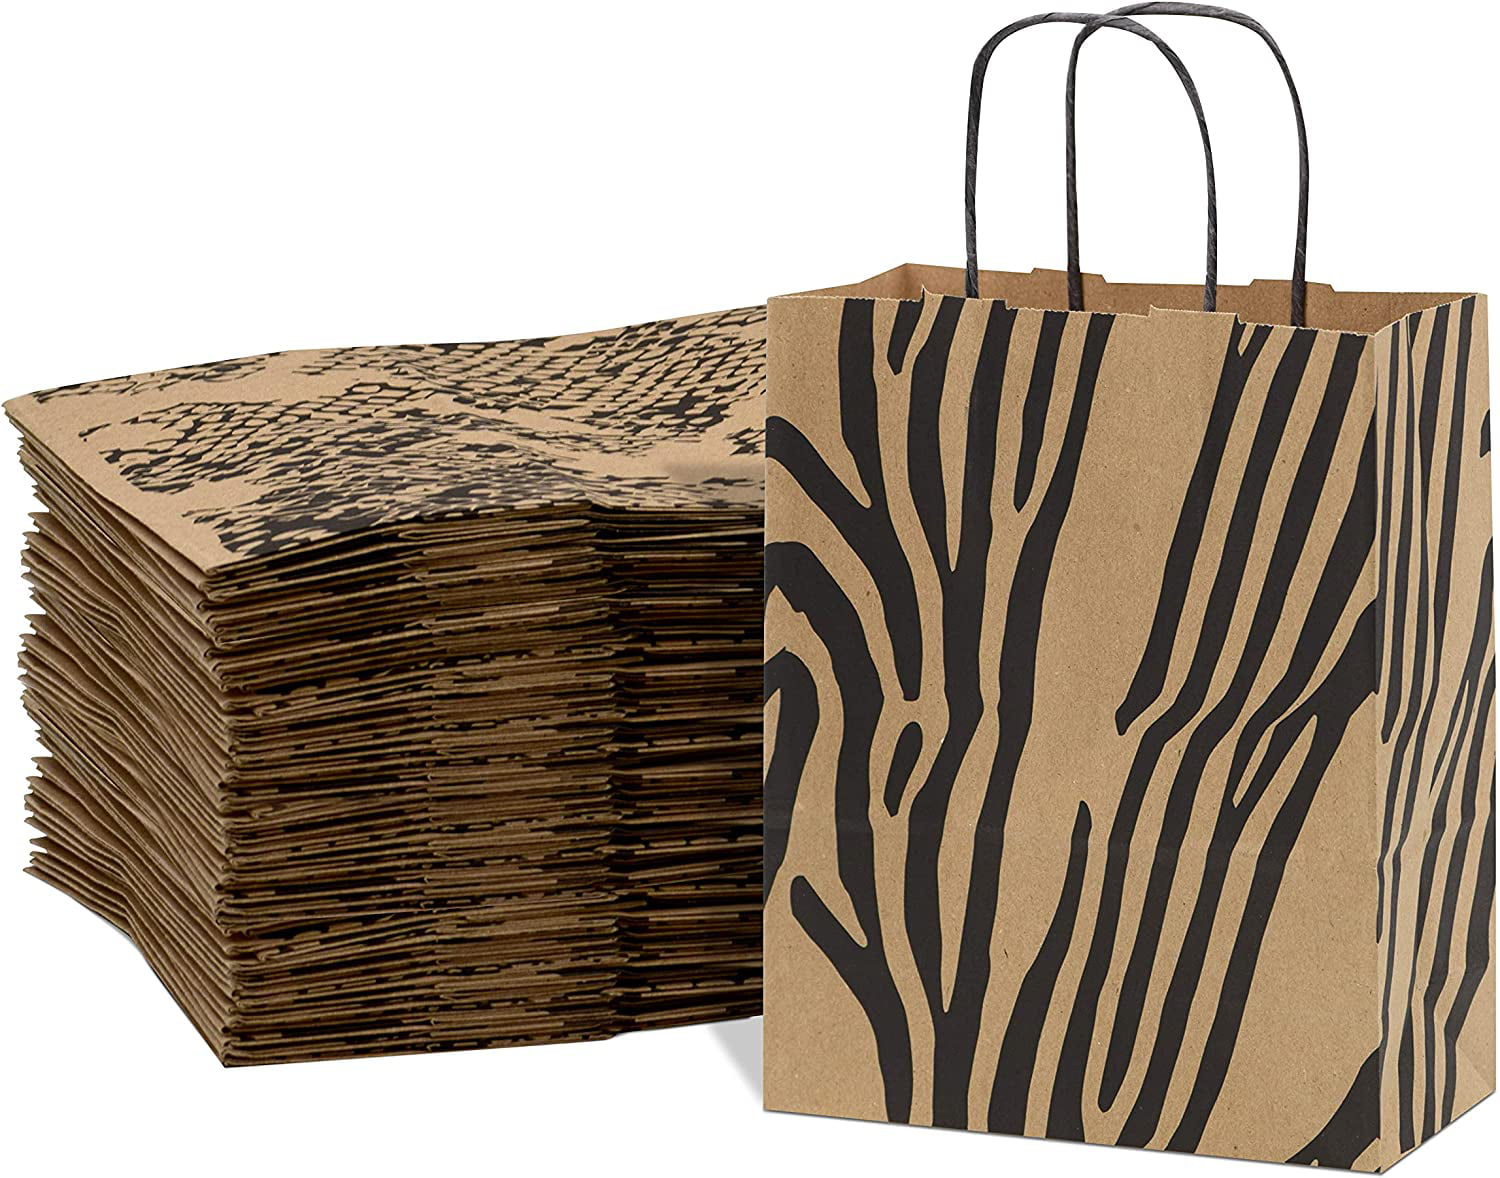 50 5x7 Zebra Bags Merchandise Flat Paper Bags Black and White Striped Party bag 